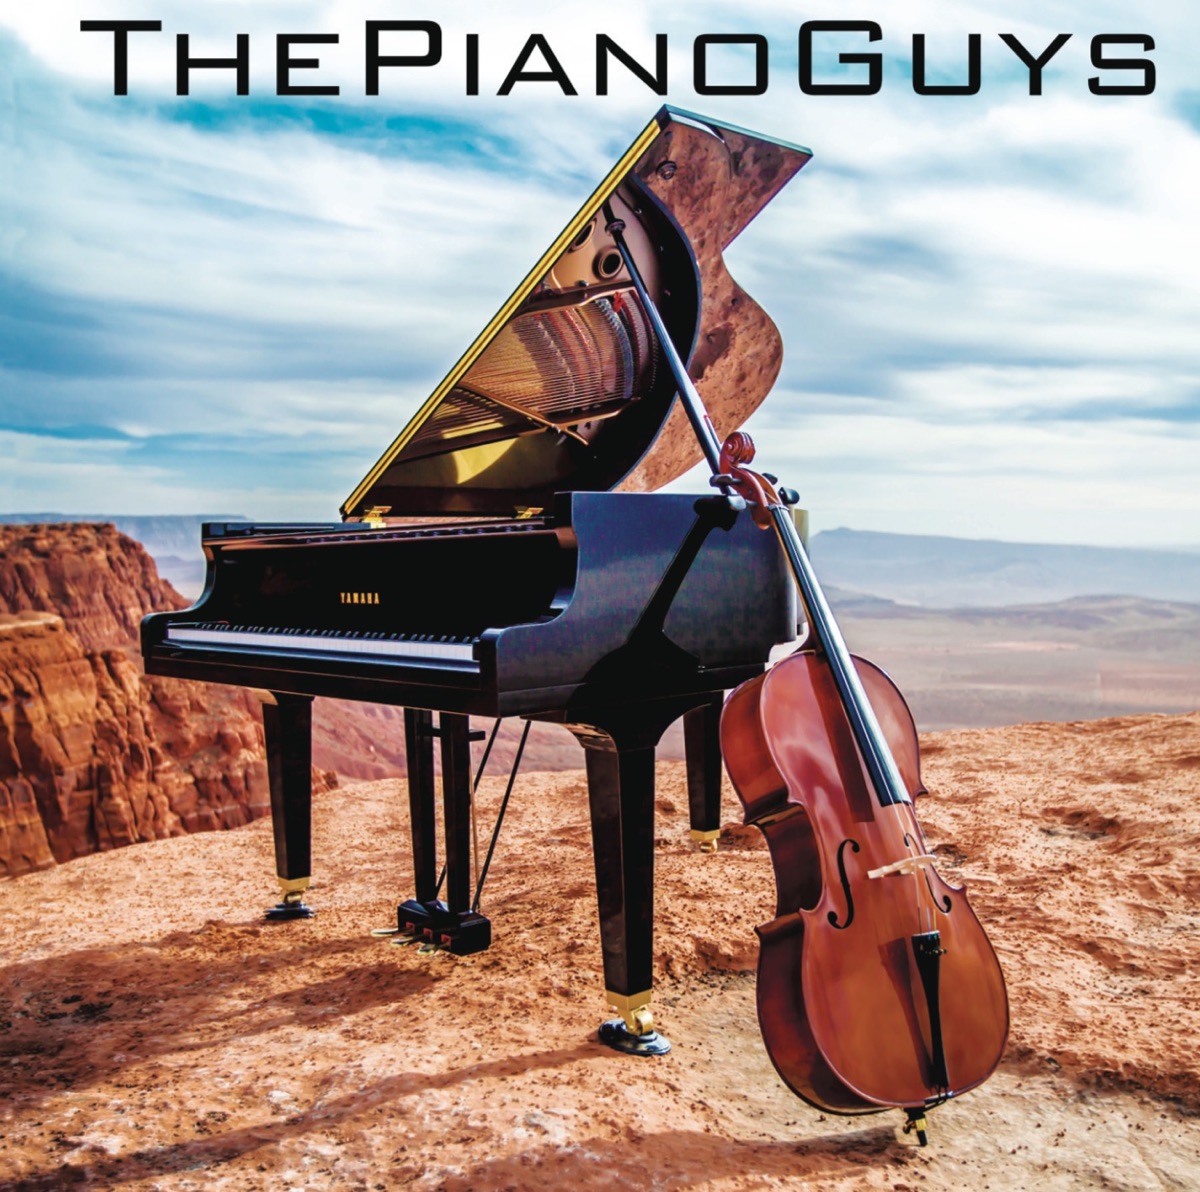 A Family Christmas by The Piano Guys on Apple Music